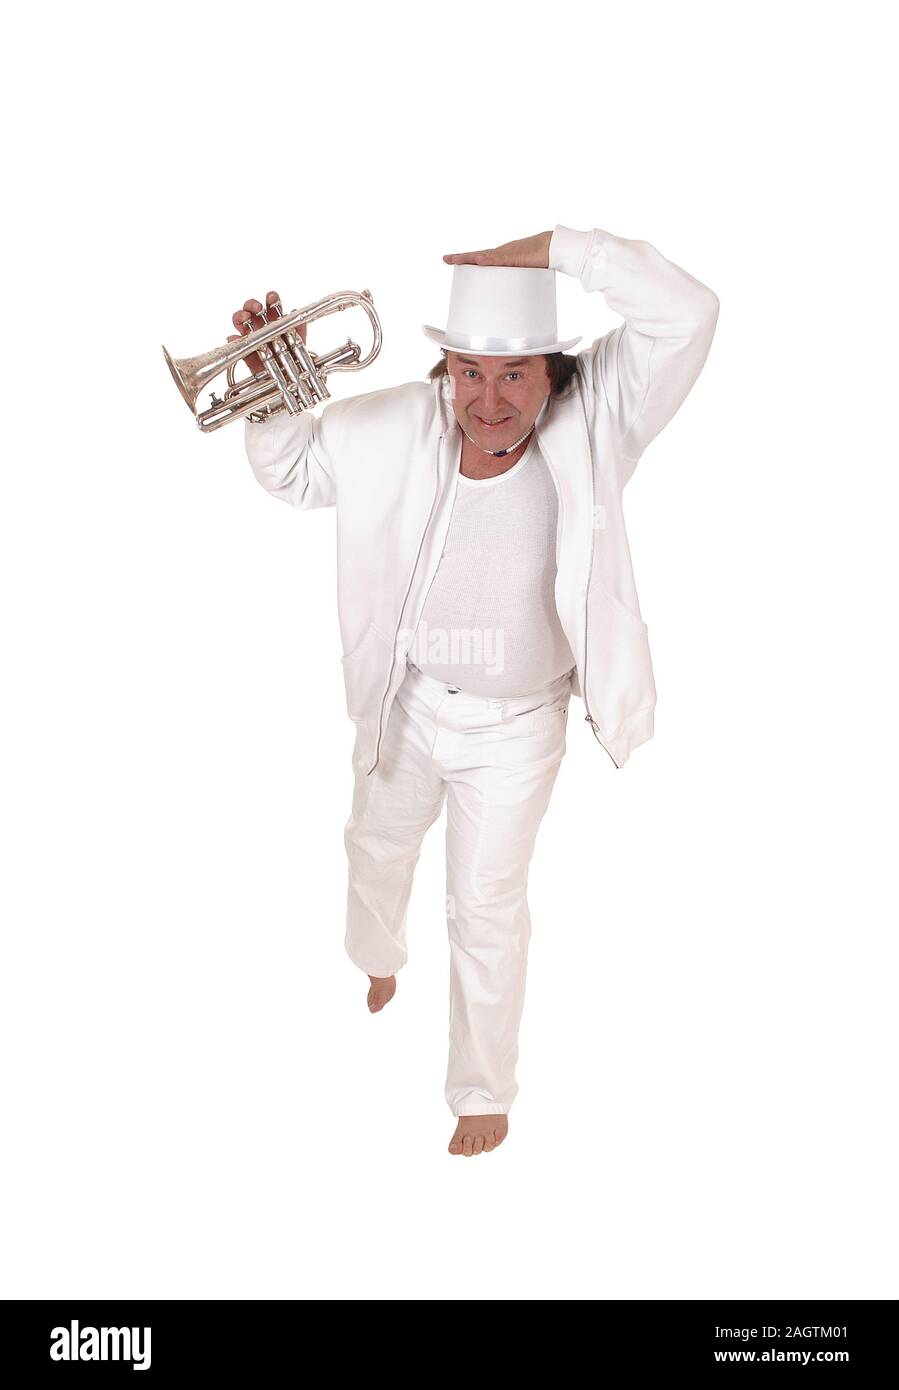 A middle age indigenous man dancing in a white outfit and white hat playing his trumpet with his long hair, isolated for white background Stock Photo